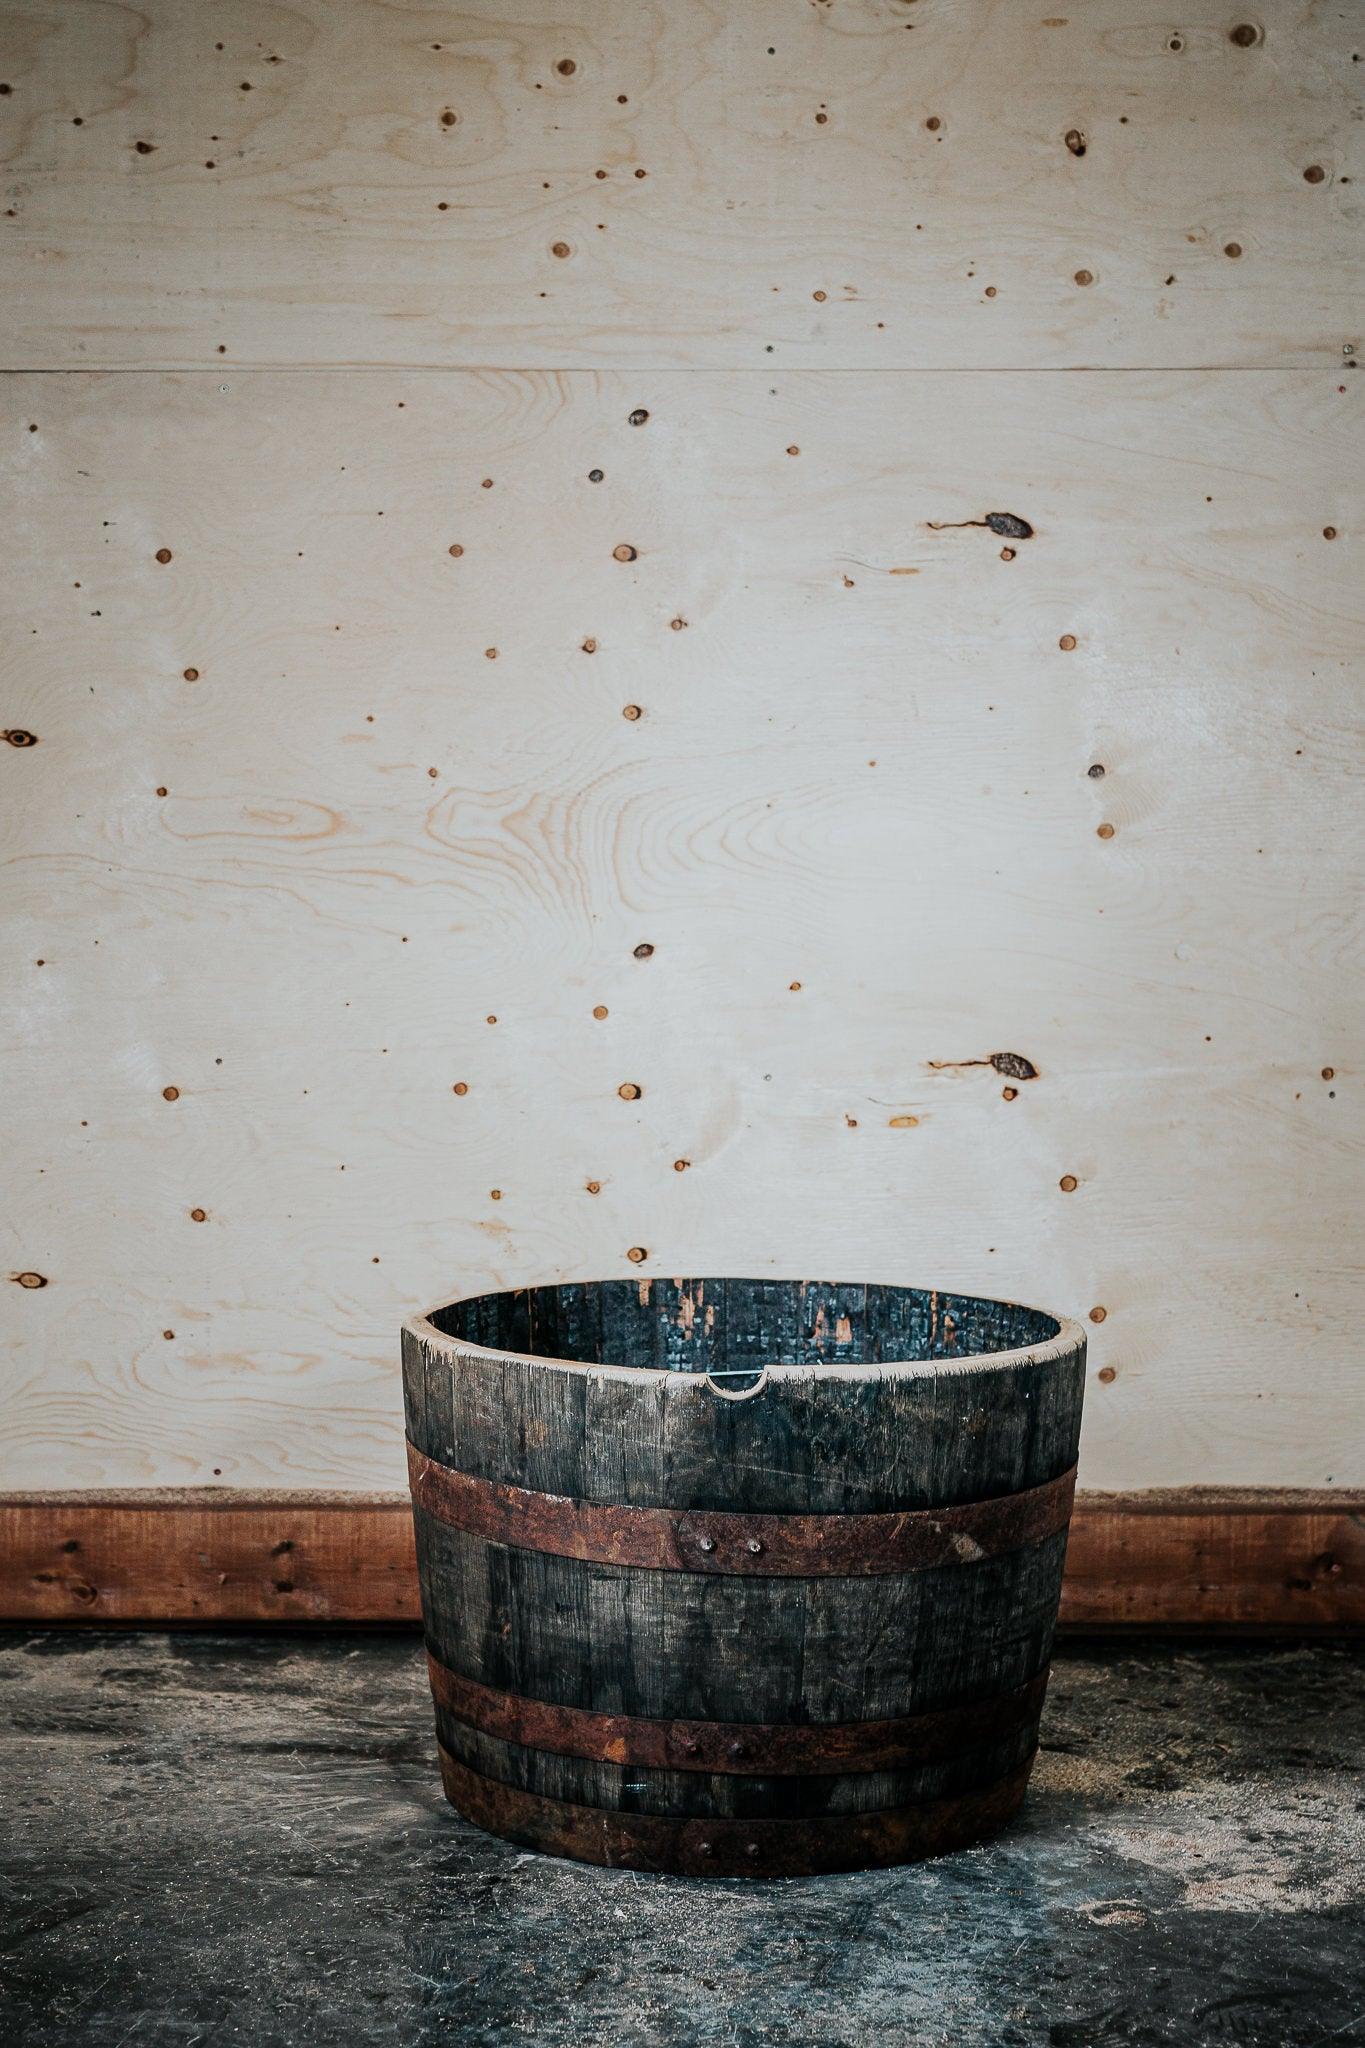 Canadian Whiskey Barrel Planter - The County Cooperage